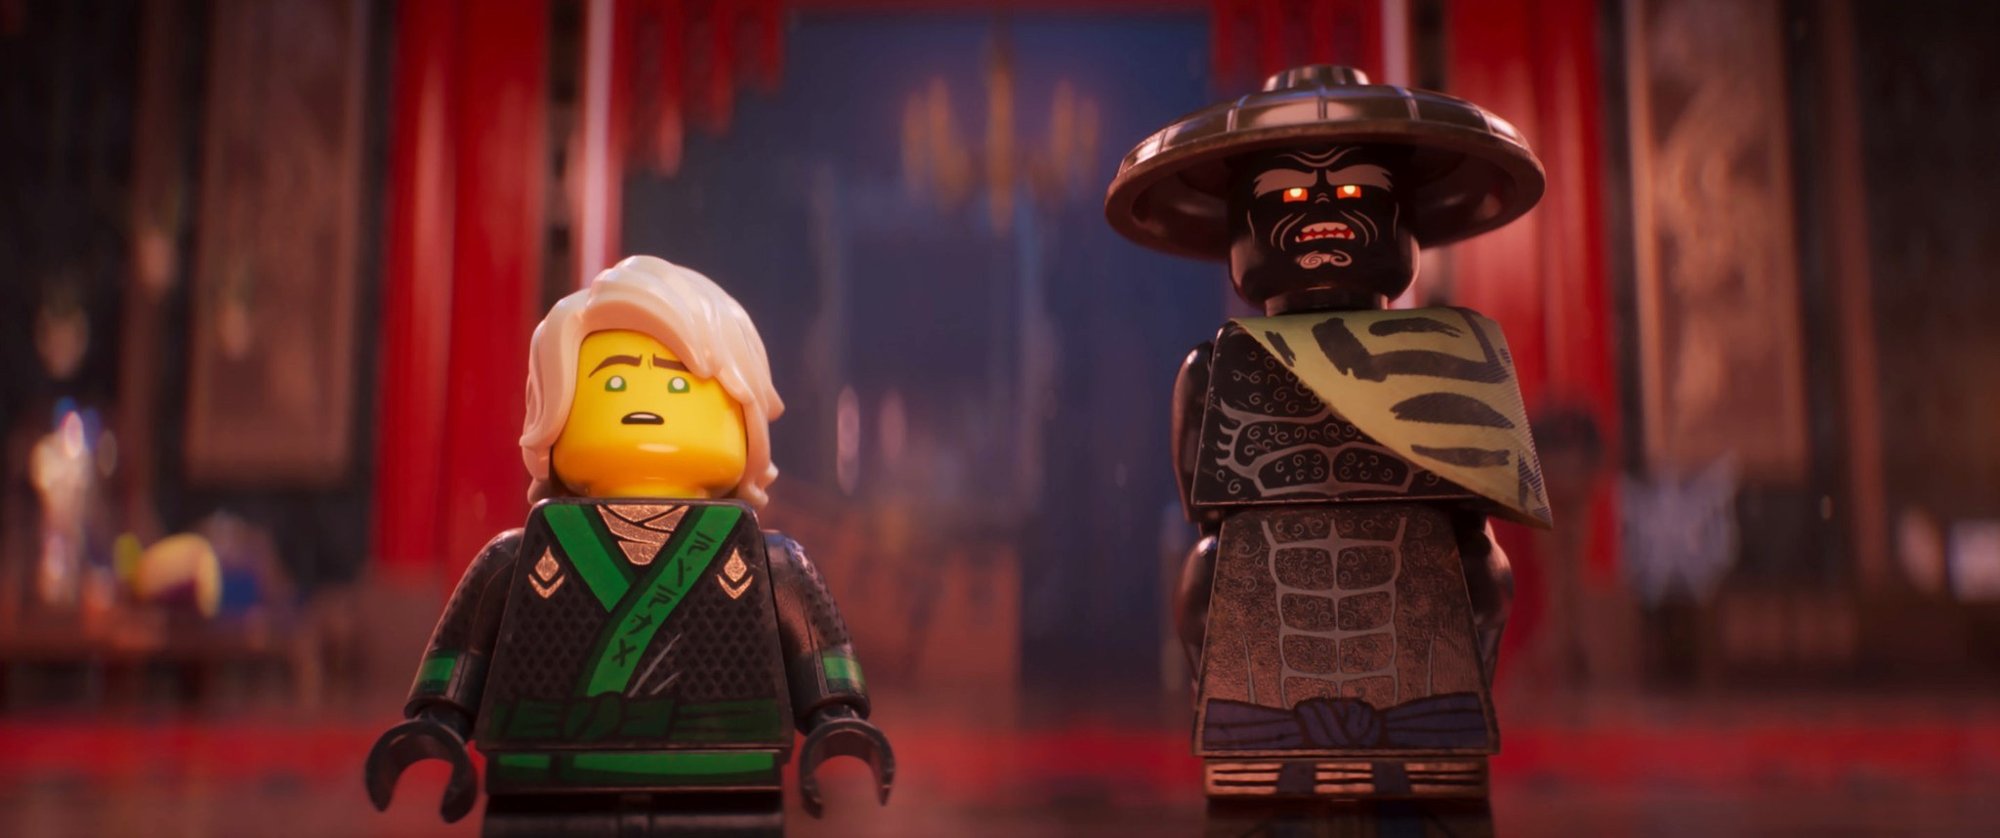 Lloyd and Garmadon from Warner Bros. Pictures' The Lego Ninjago Movie (2017)